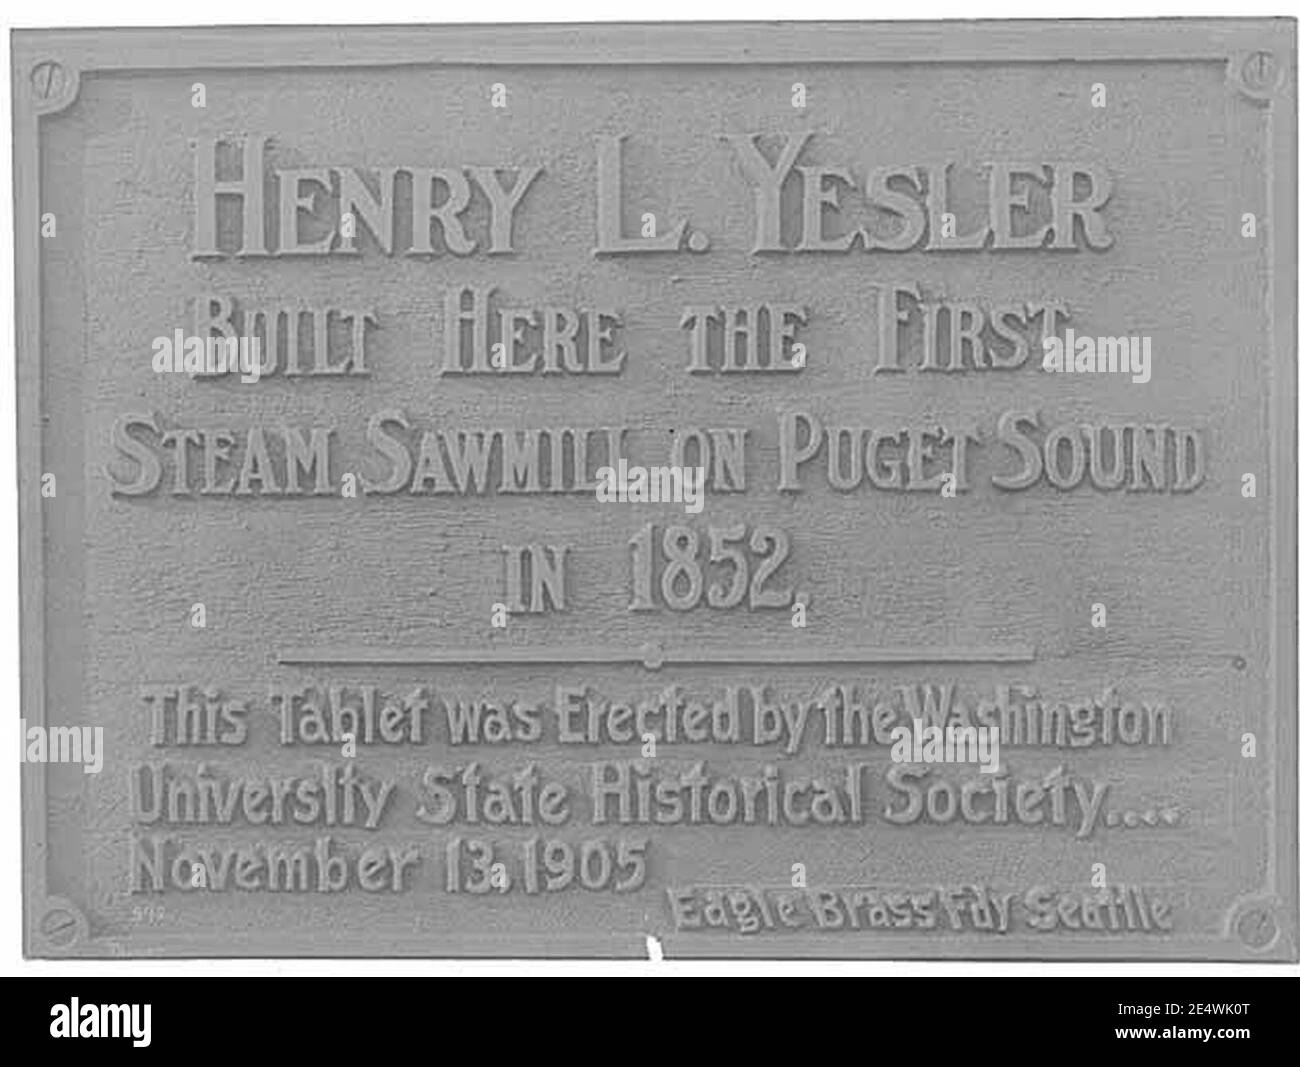 Memorial tablet for the Henry L Yesler sawmill, Seattle, ca 1905 (PEISER 27). Stock Photo